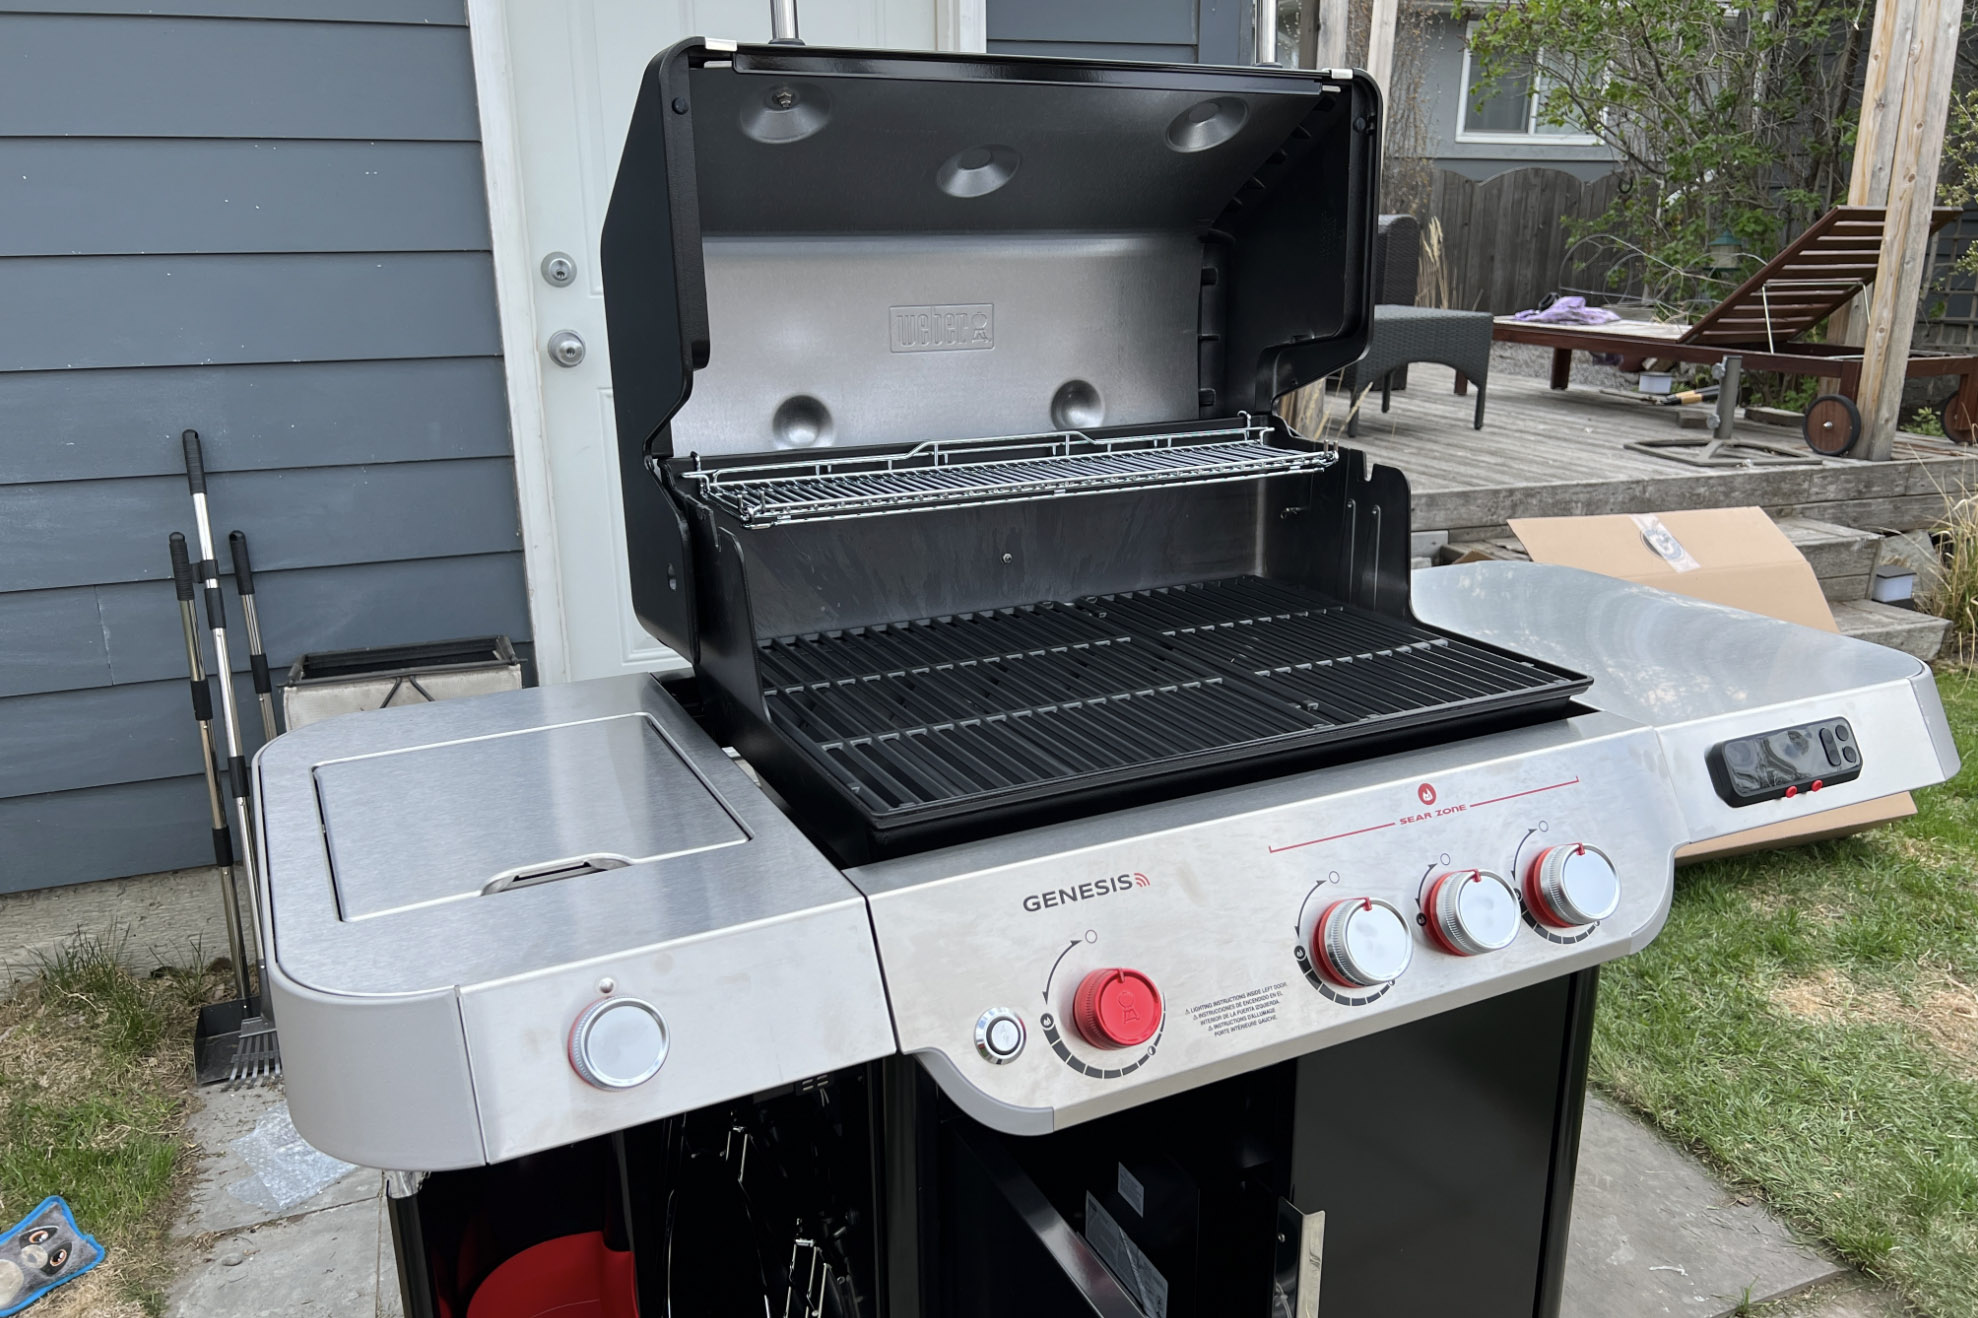 I. Introduction to Weber Grills